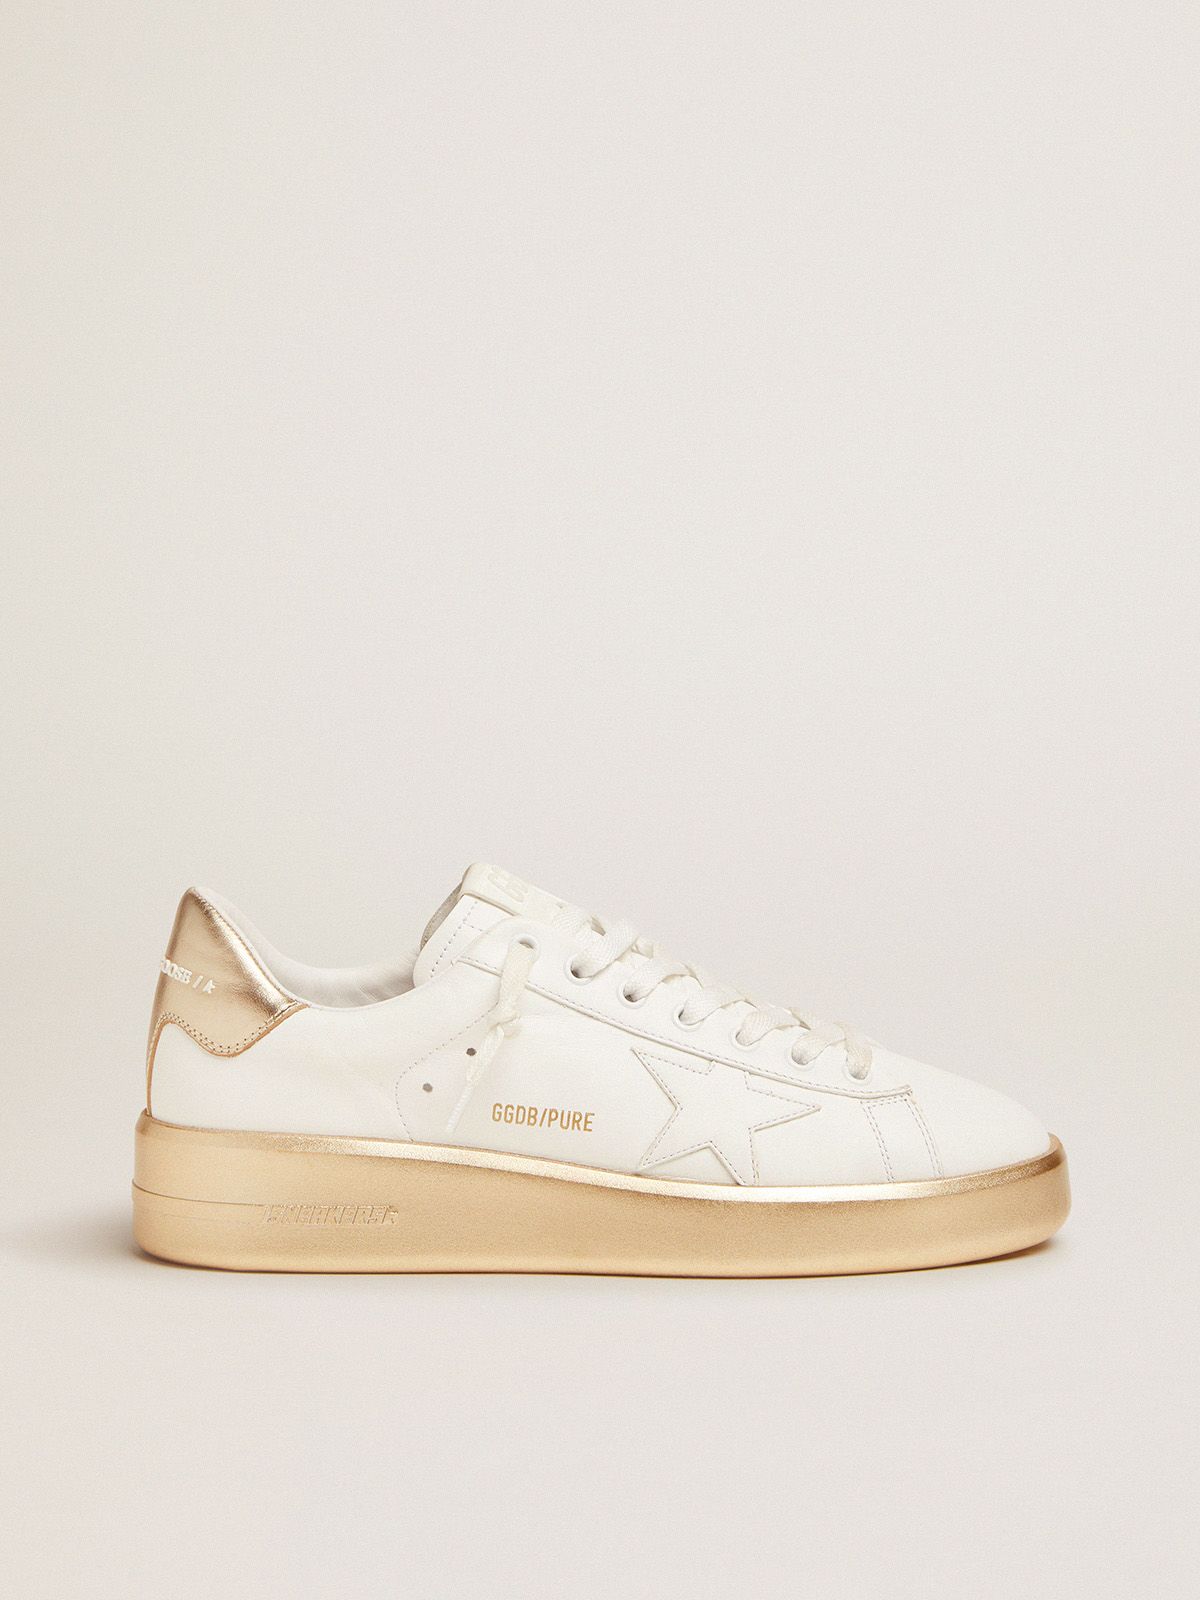 Purestar sneakers in white leather with foxing and gold laminated leather heel tab | 